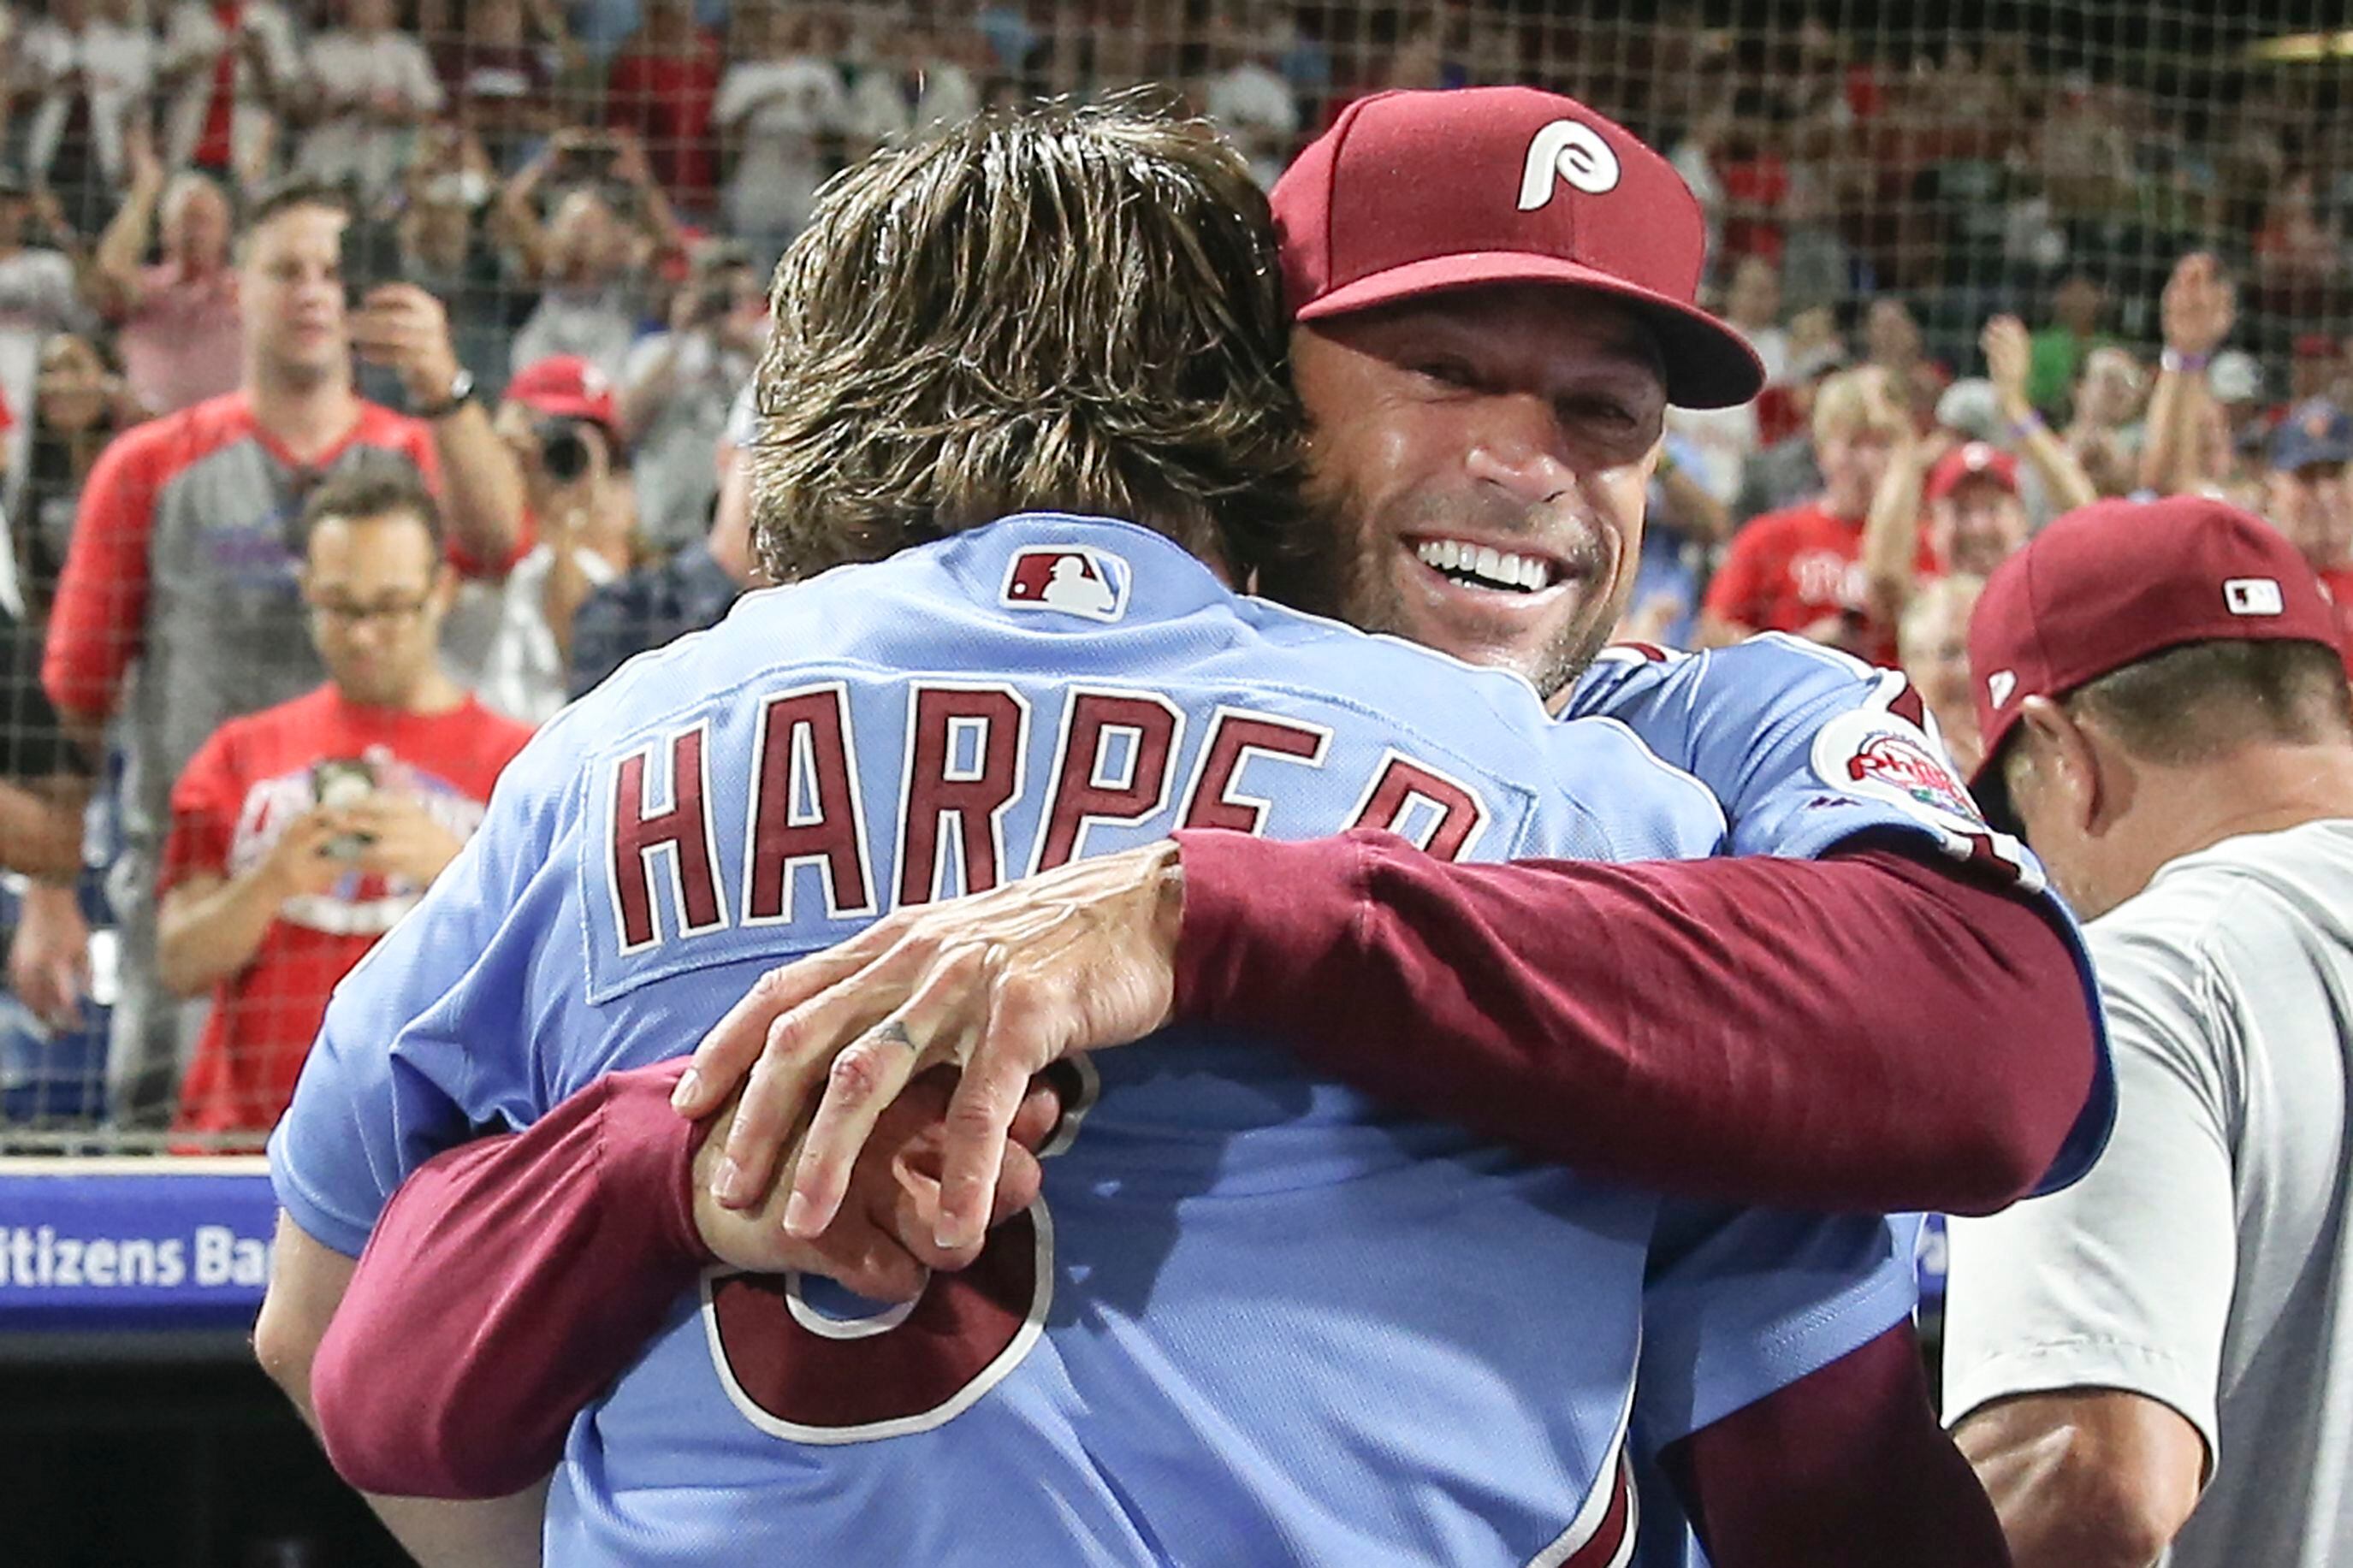 Bryce Harper: Walk-off grand slam 'is what you live for